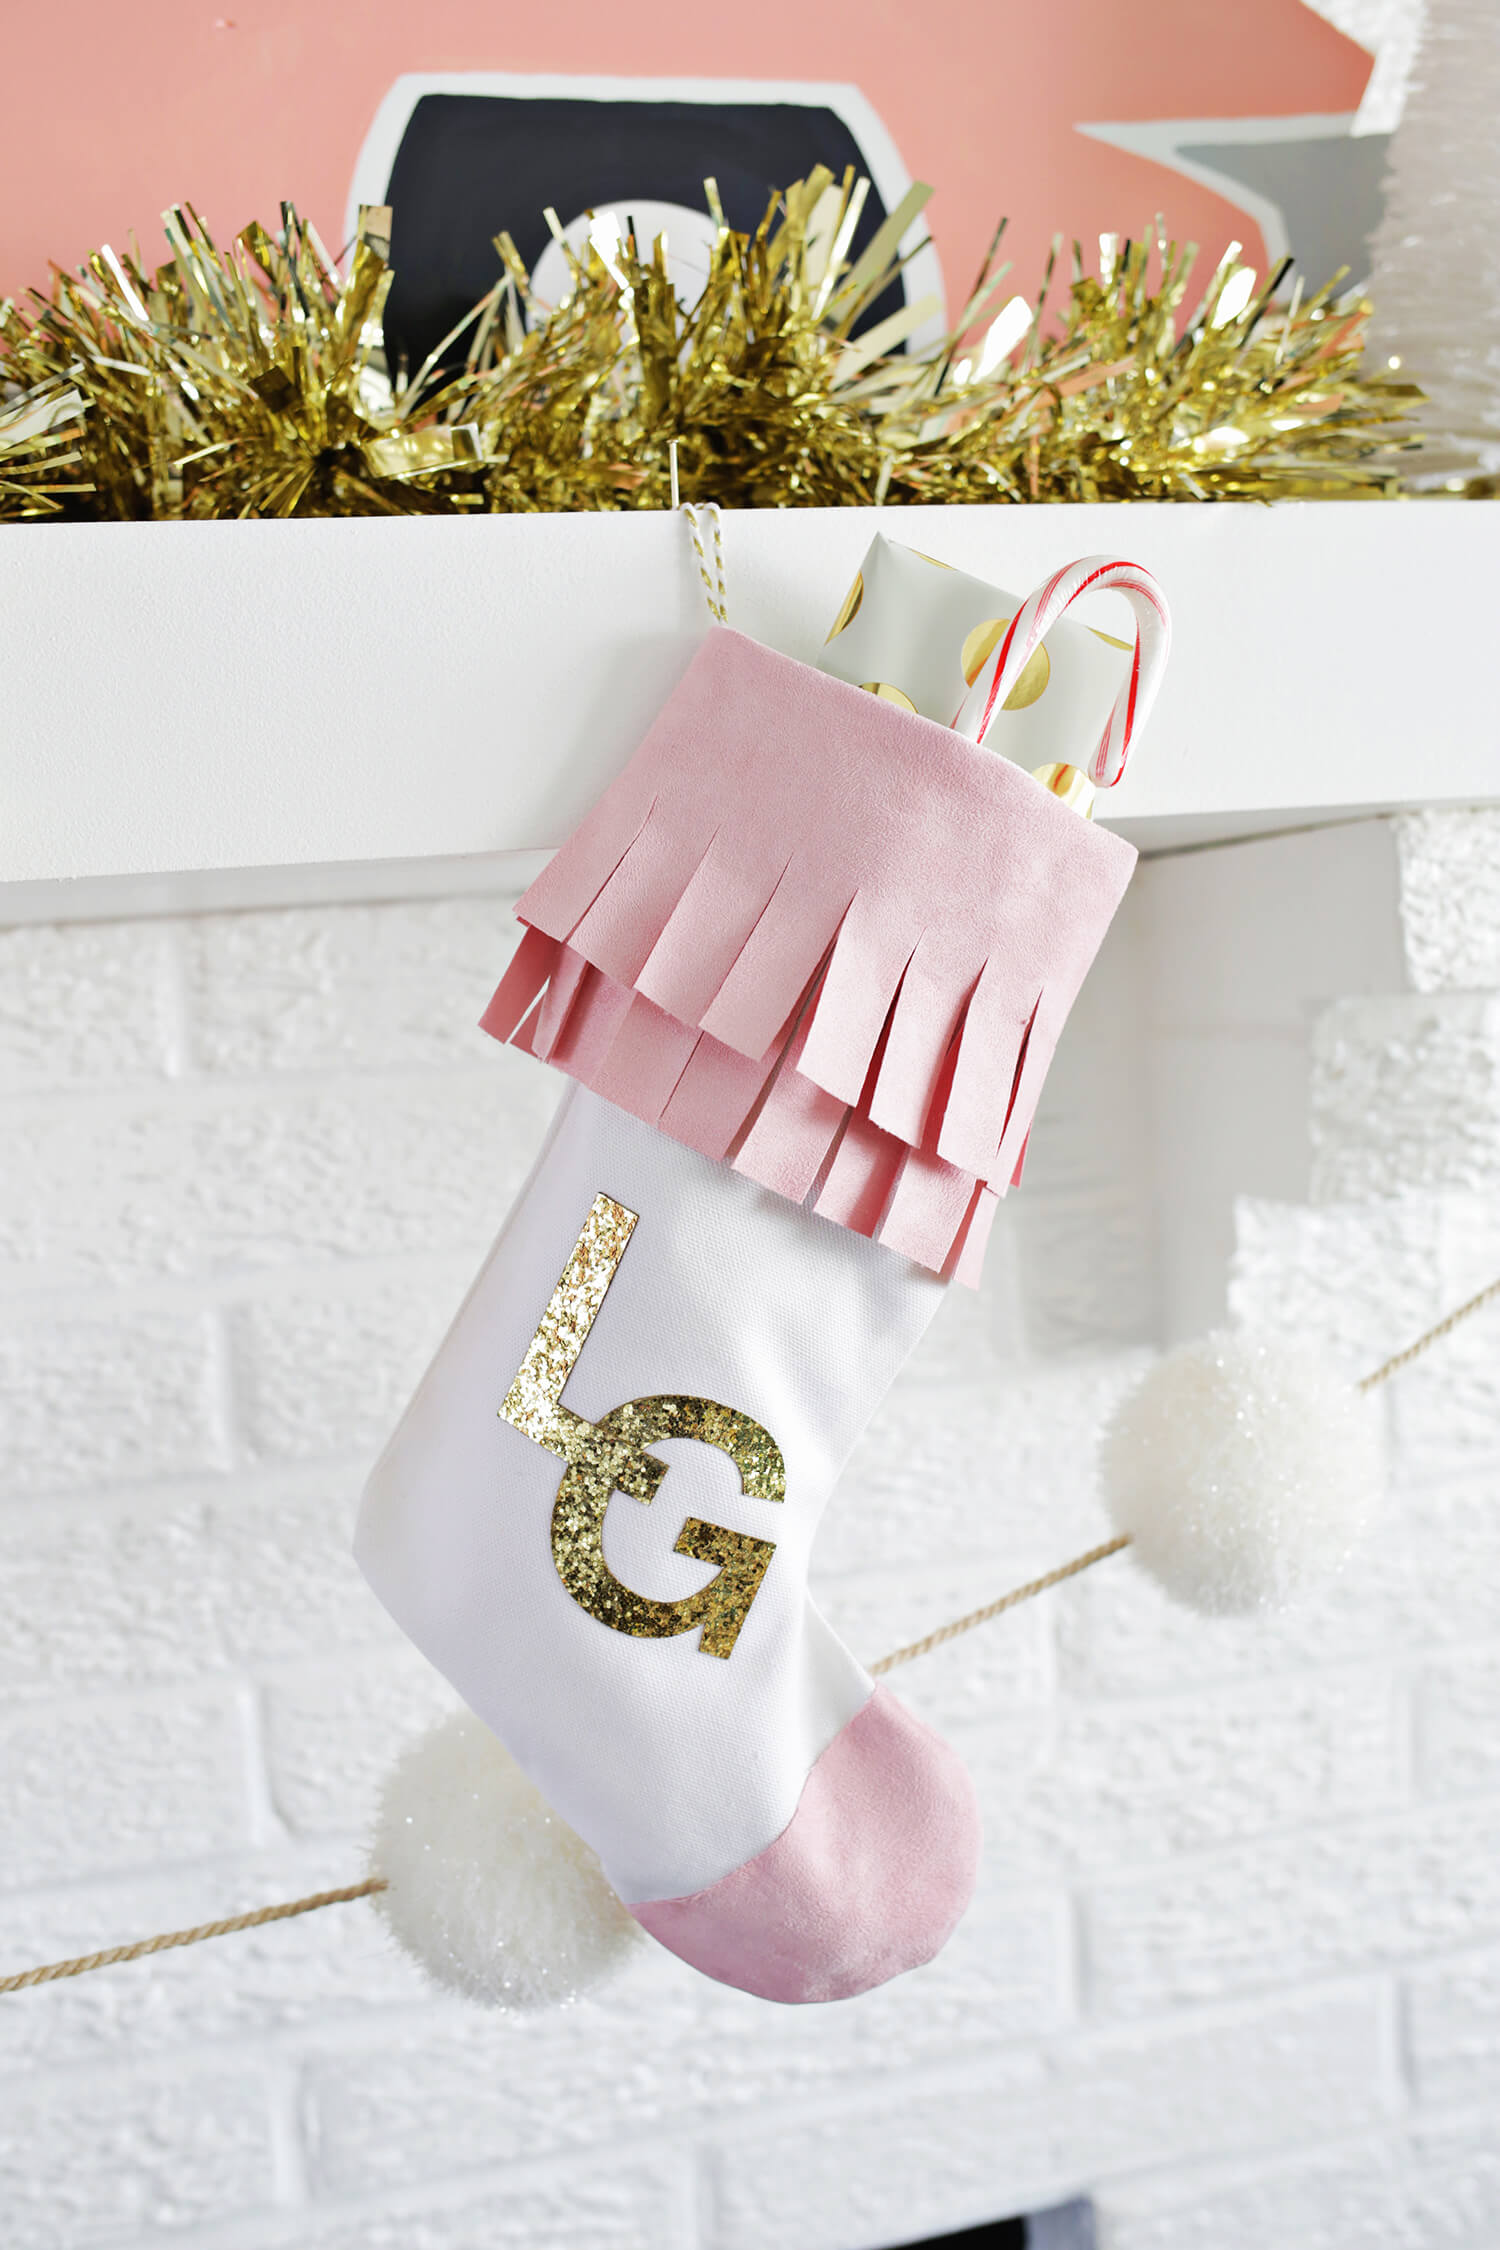 DIY faux suede Christmas stockings with glitter monograms